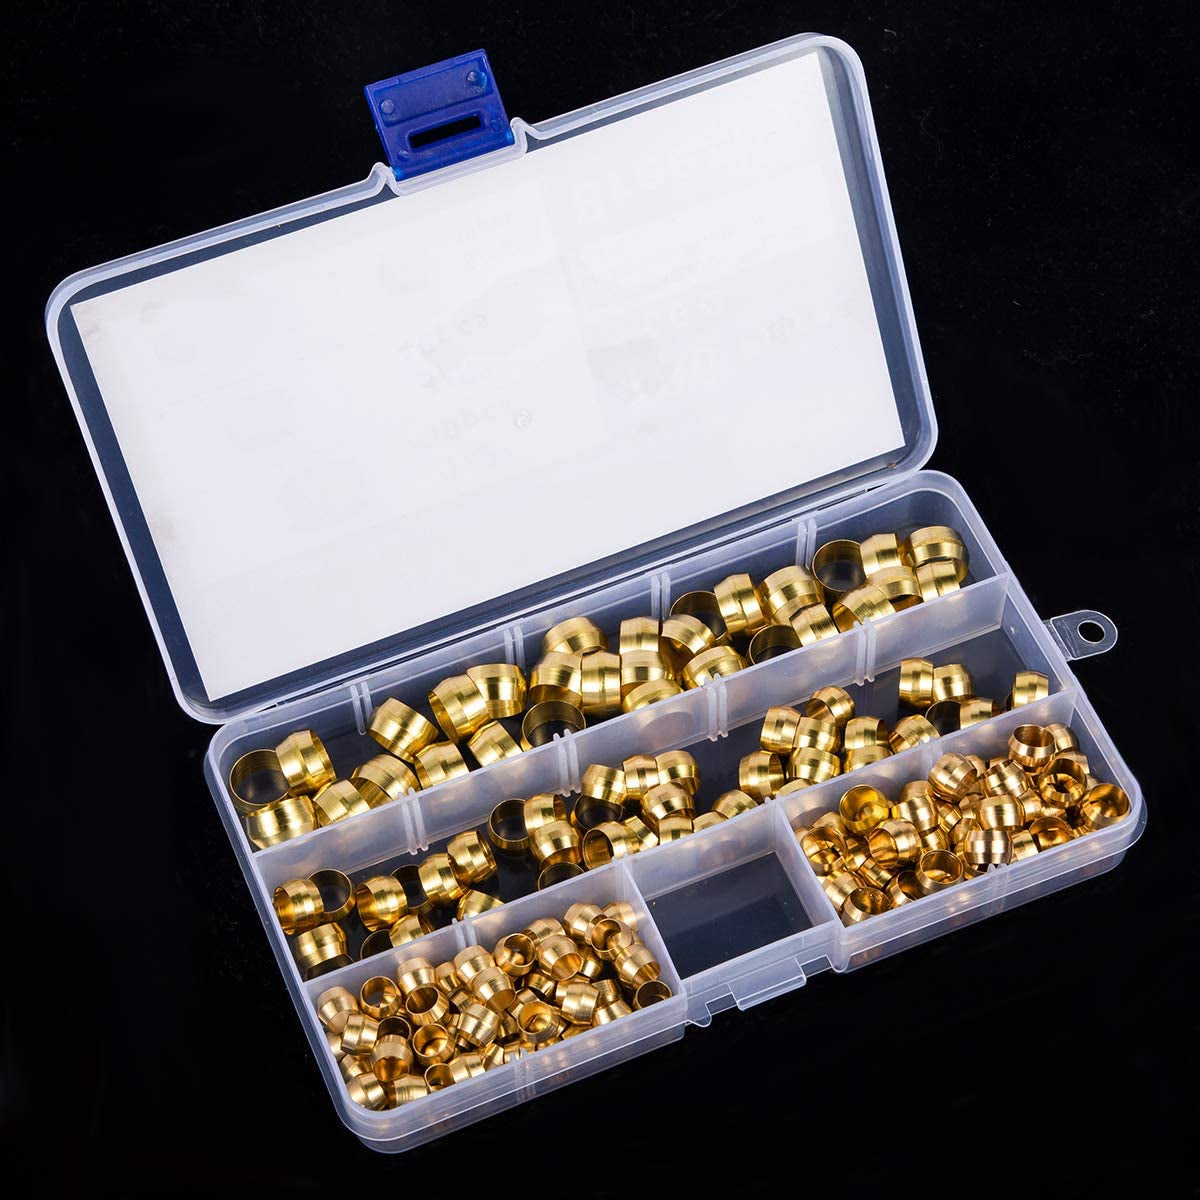 180PCS Tube OD（1/4" 5/16" 3/8" 1/2") Brass Compression Sleeves Ferrules,4 Sizes Brass Compression Fitting Assortment Kit